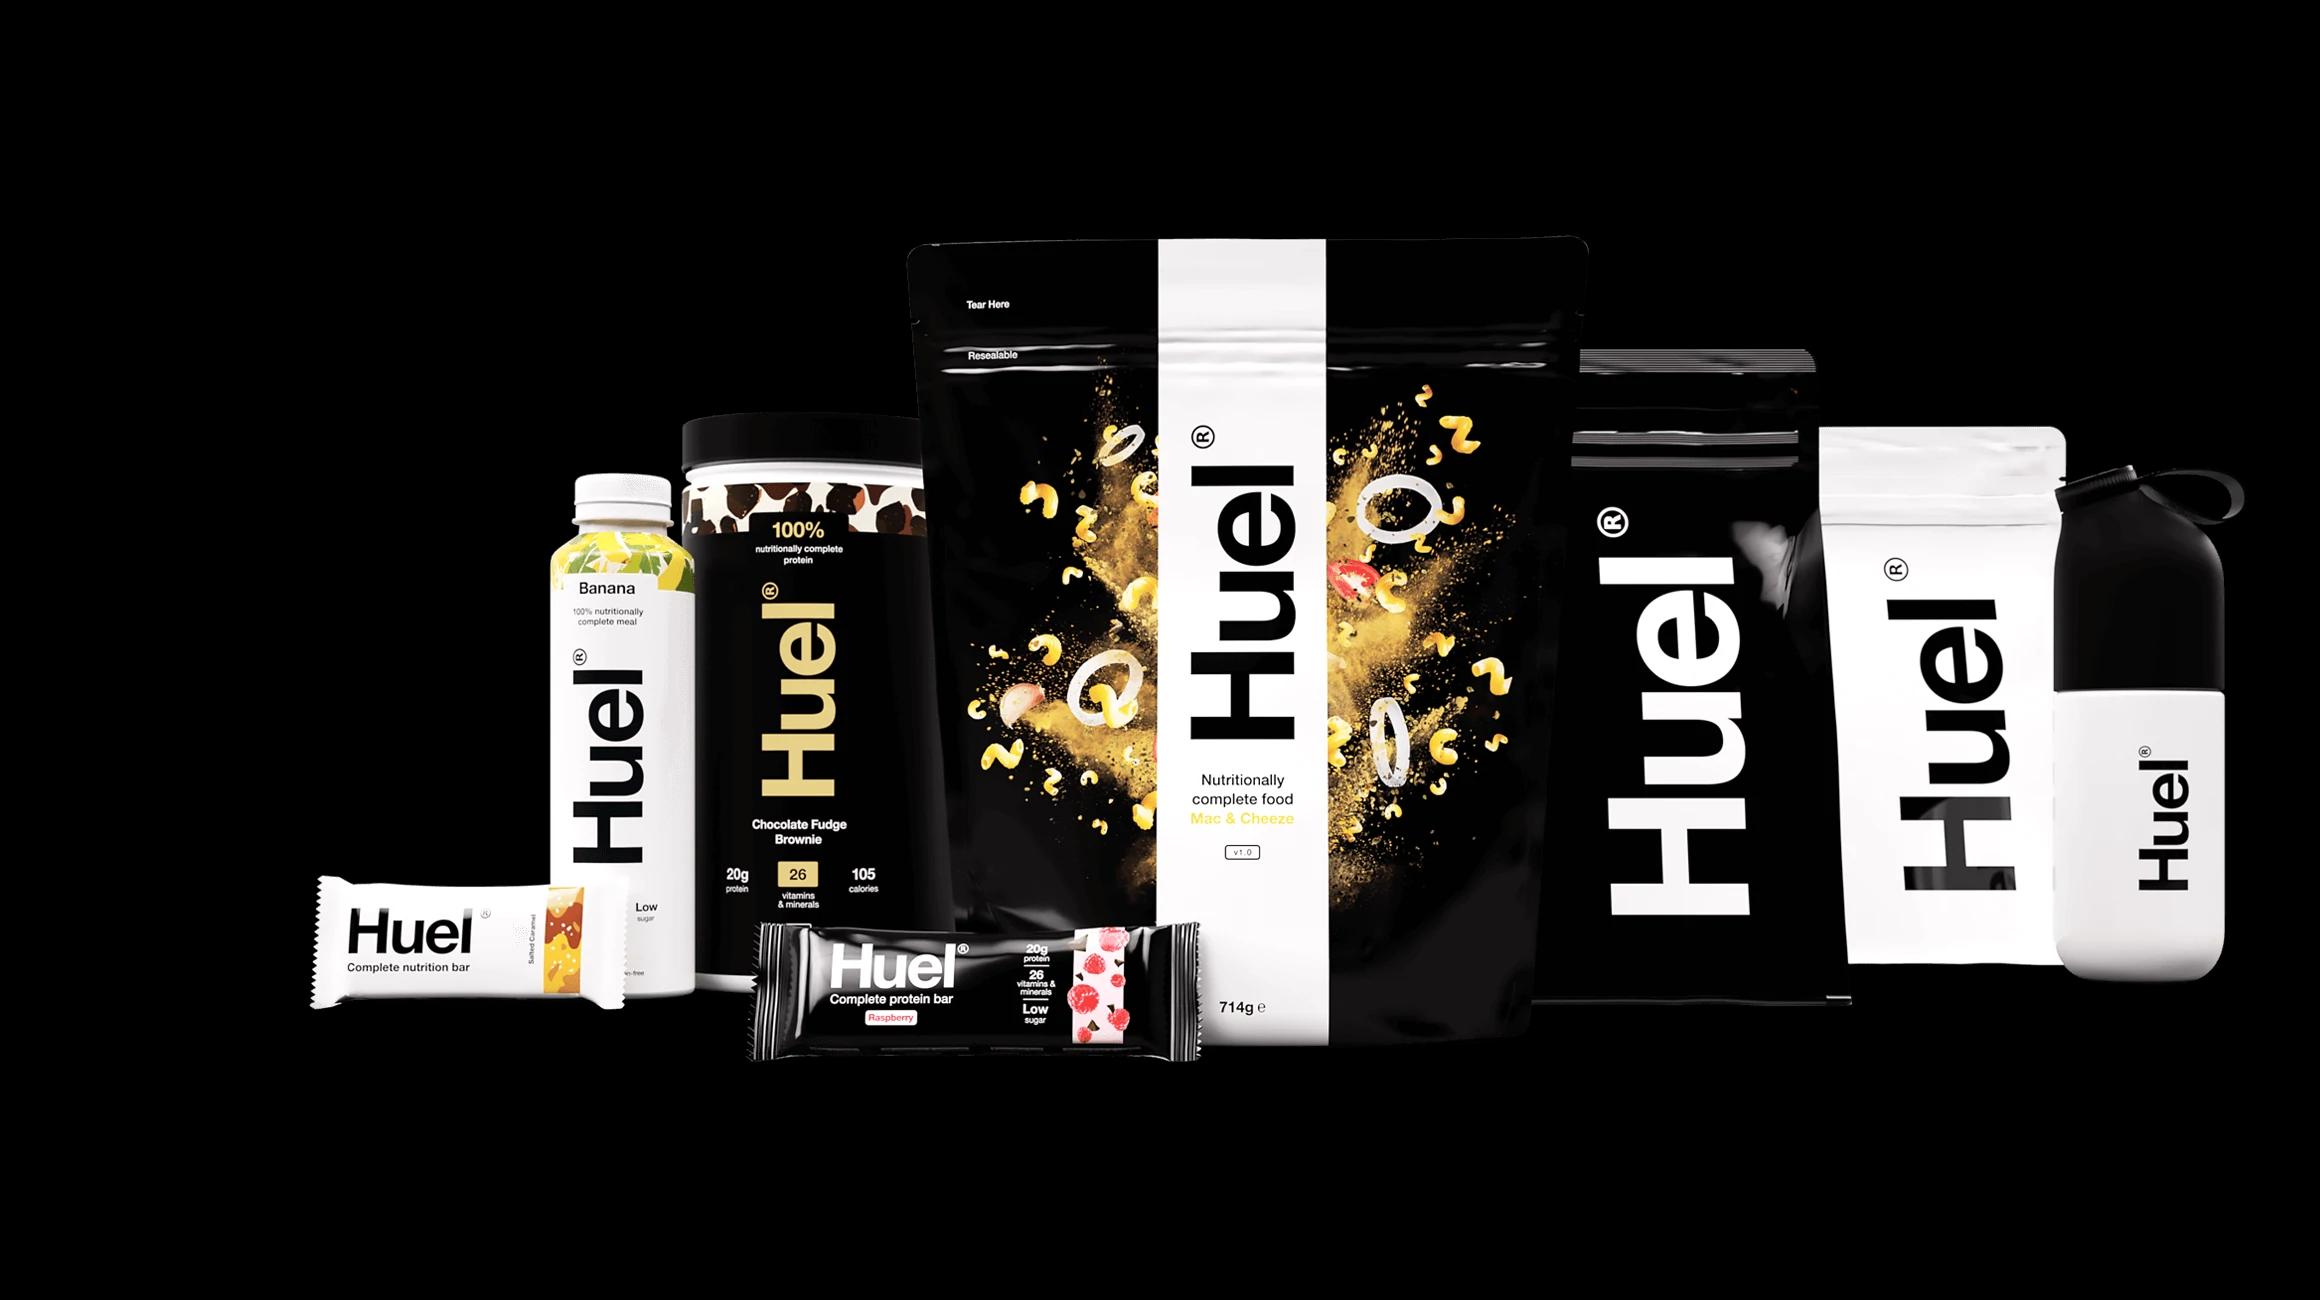 Huel Black Edition Review - Eat Healthy and Efficiently - The Five